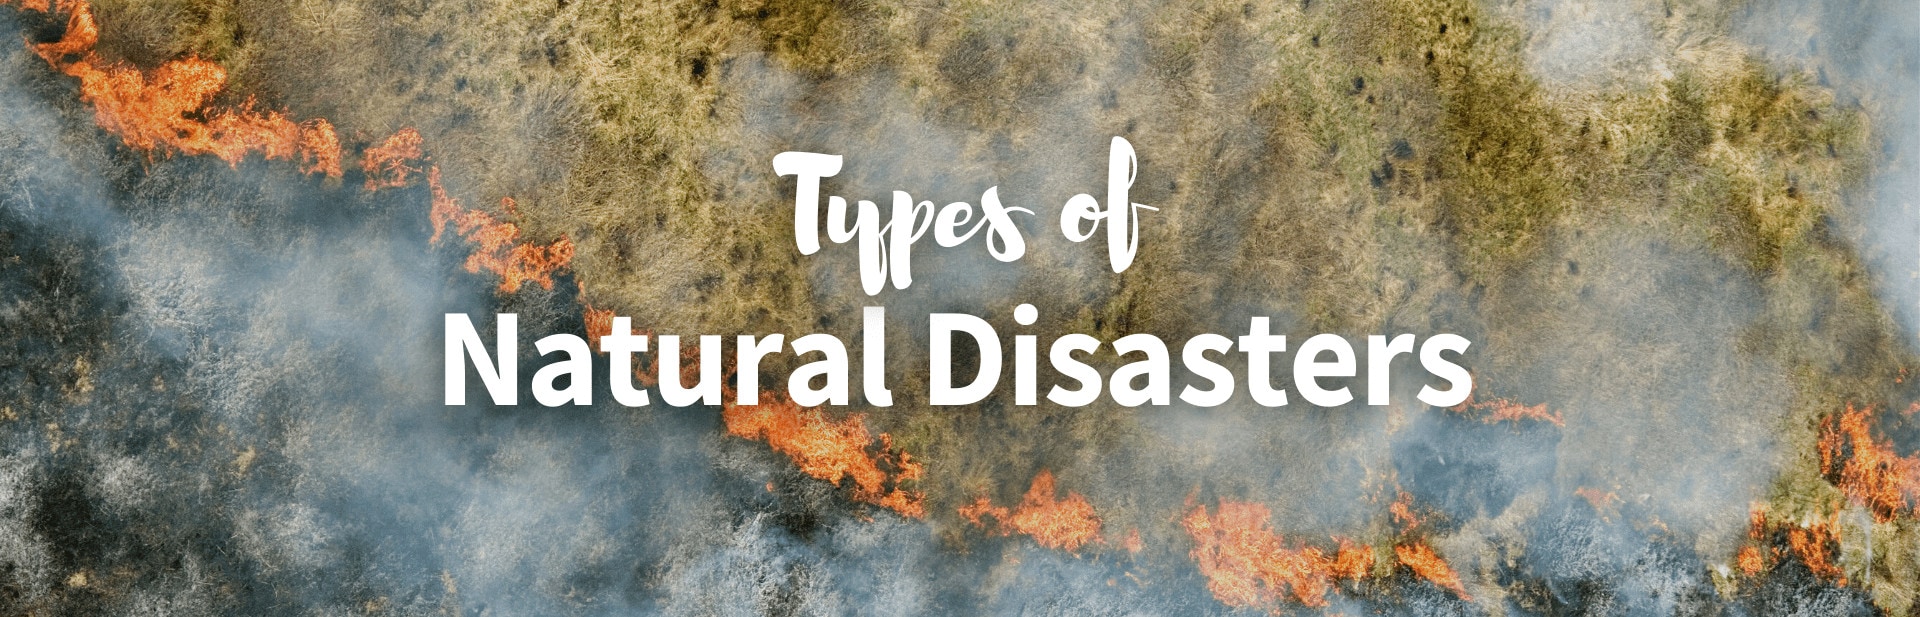 24 Types of Natural Disasters That You Need To Know - Outforia